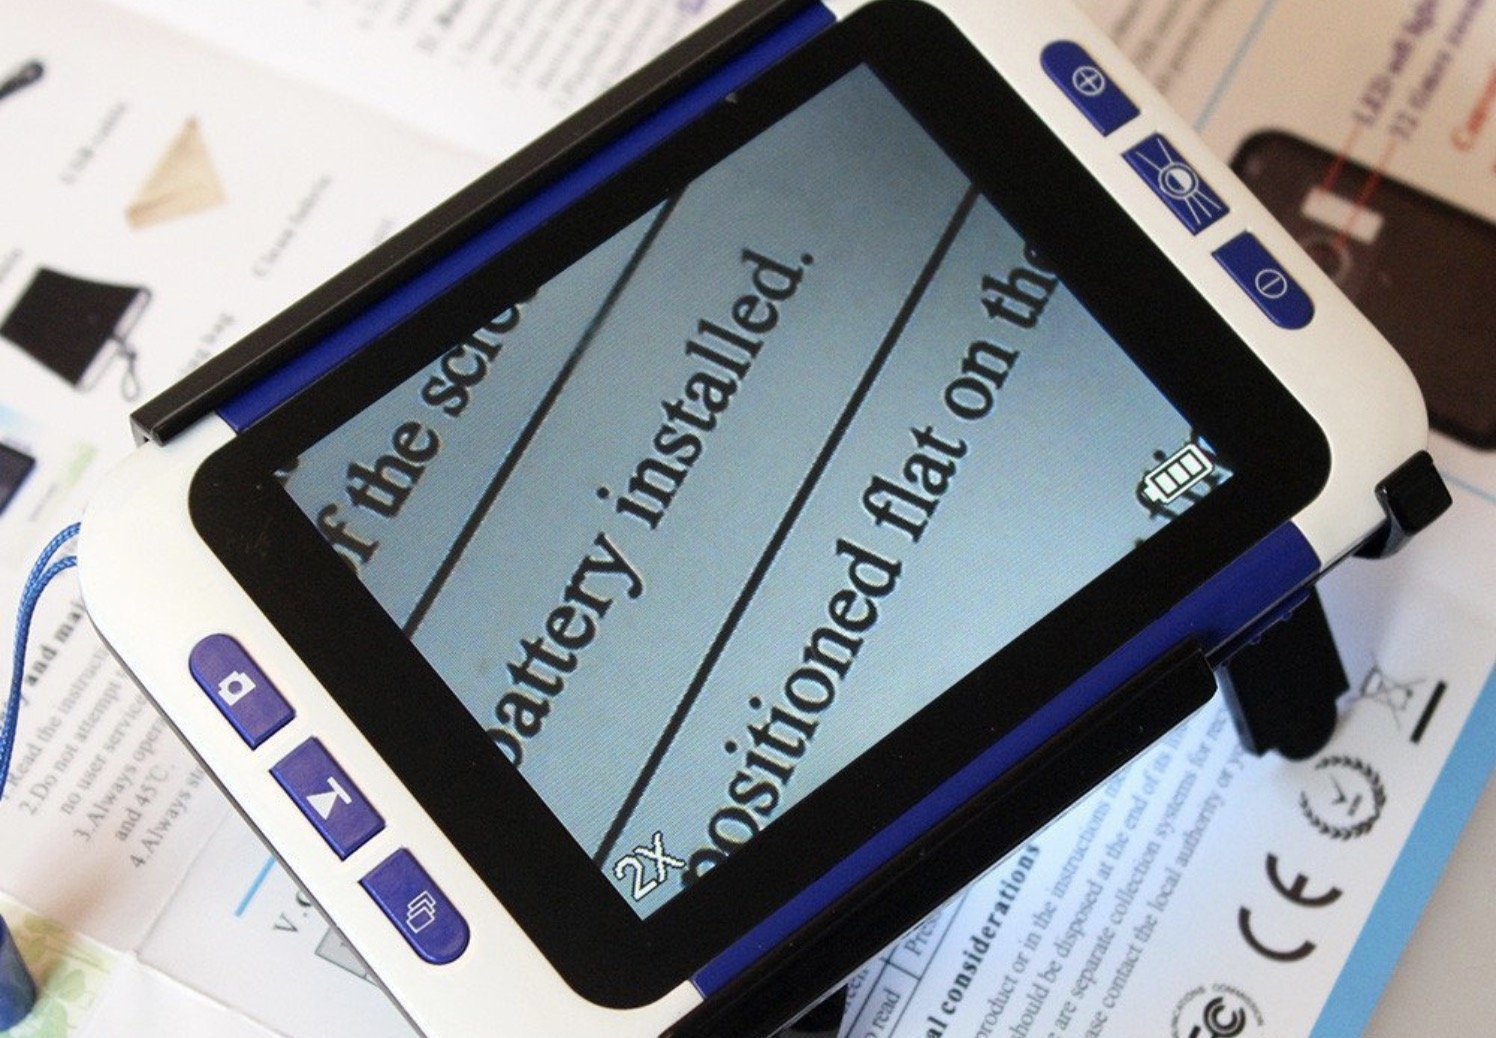 An image of an electronic magnifier showing larger text inside a book